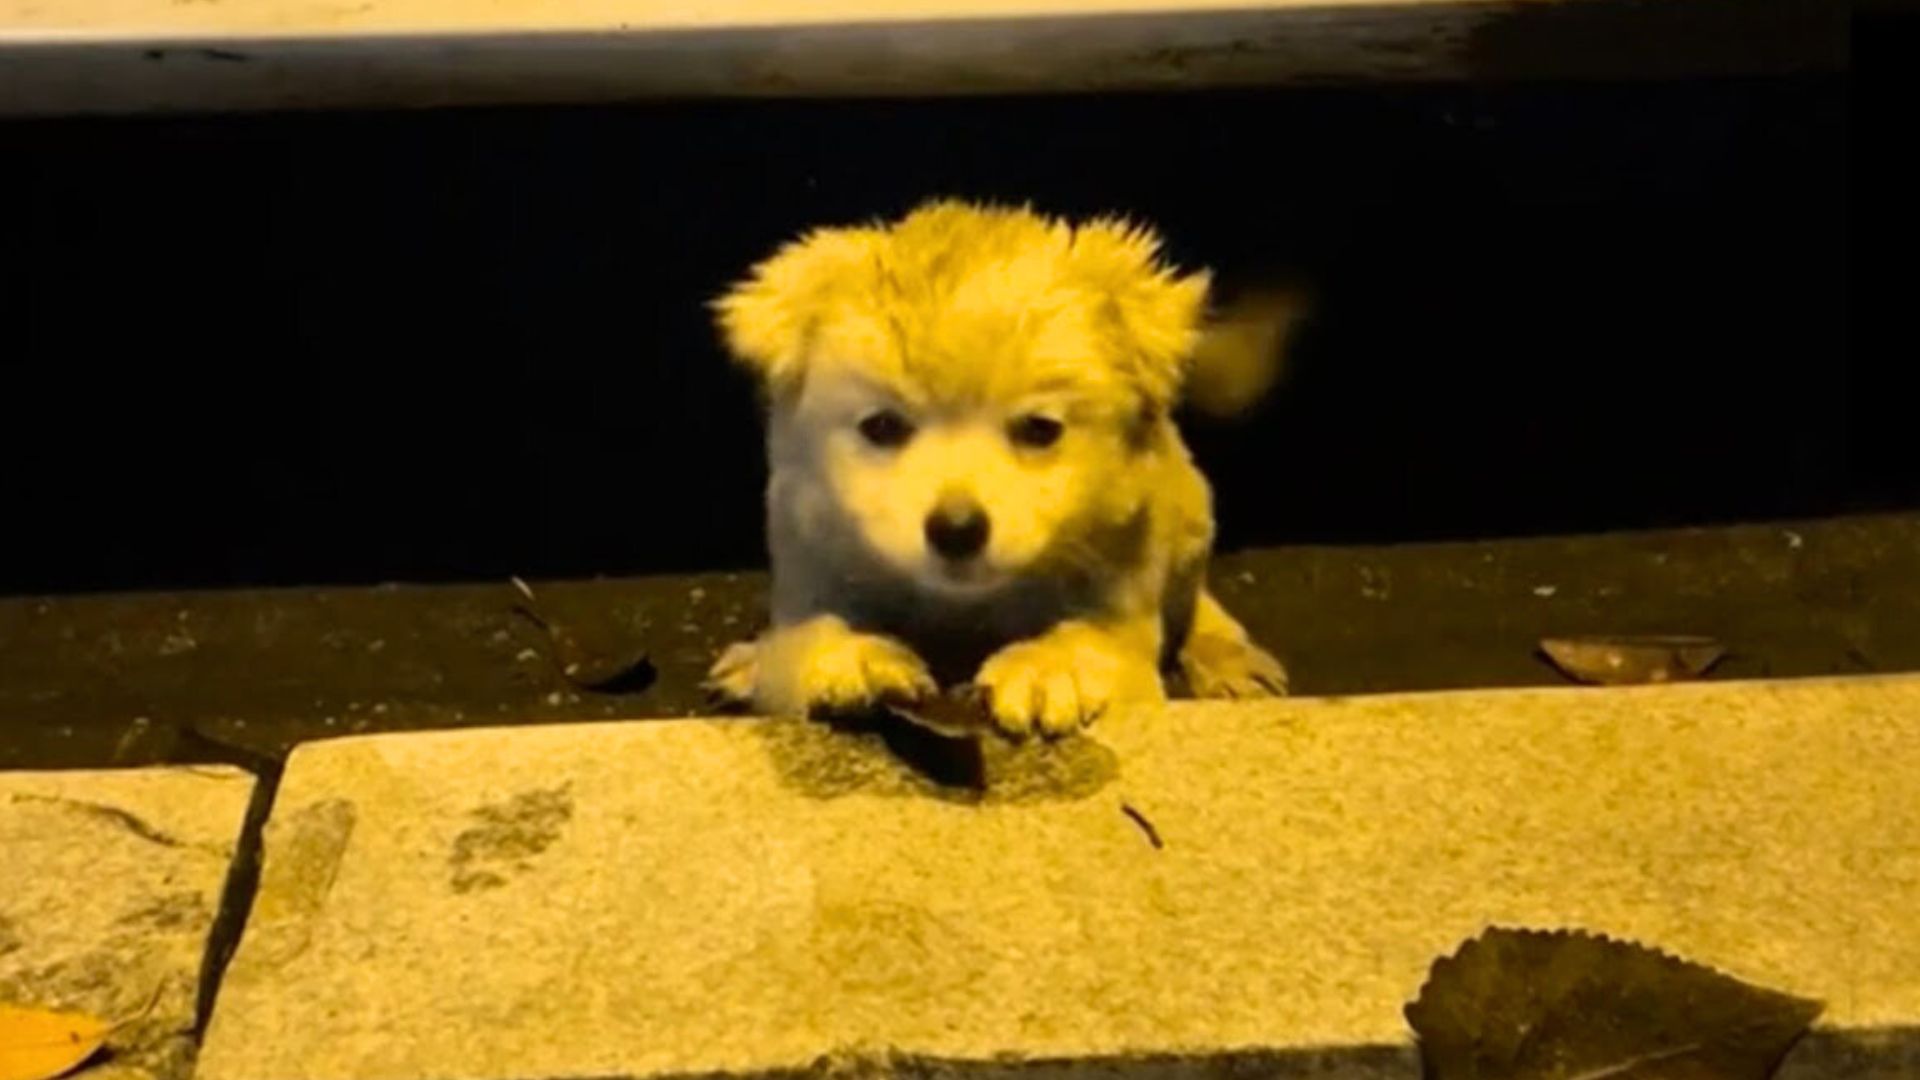 All This Poor Puppy Wanted Was Help, But He Was Too Scared To Leave His Spot And Ask For It